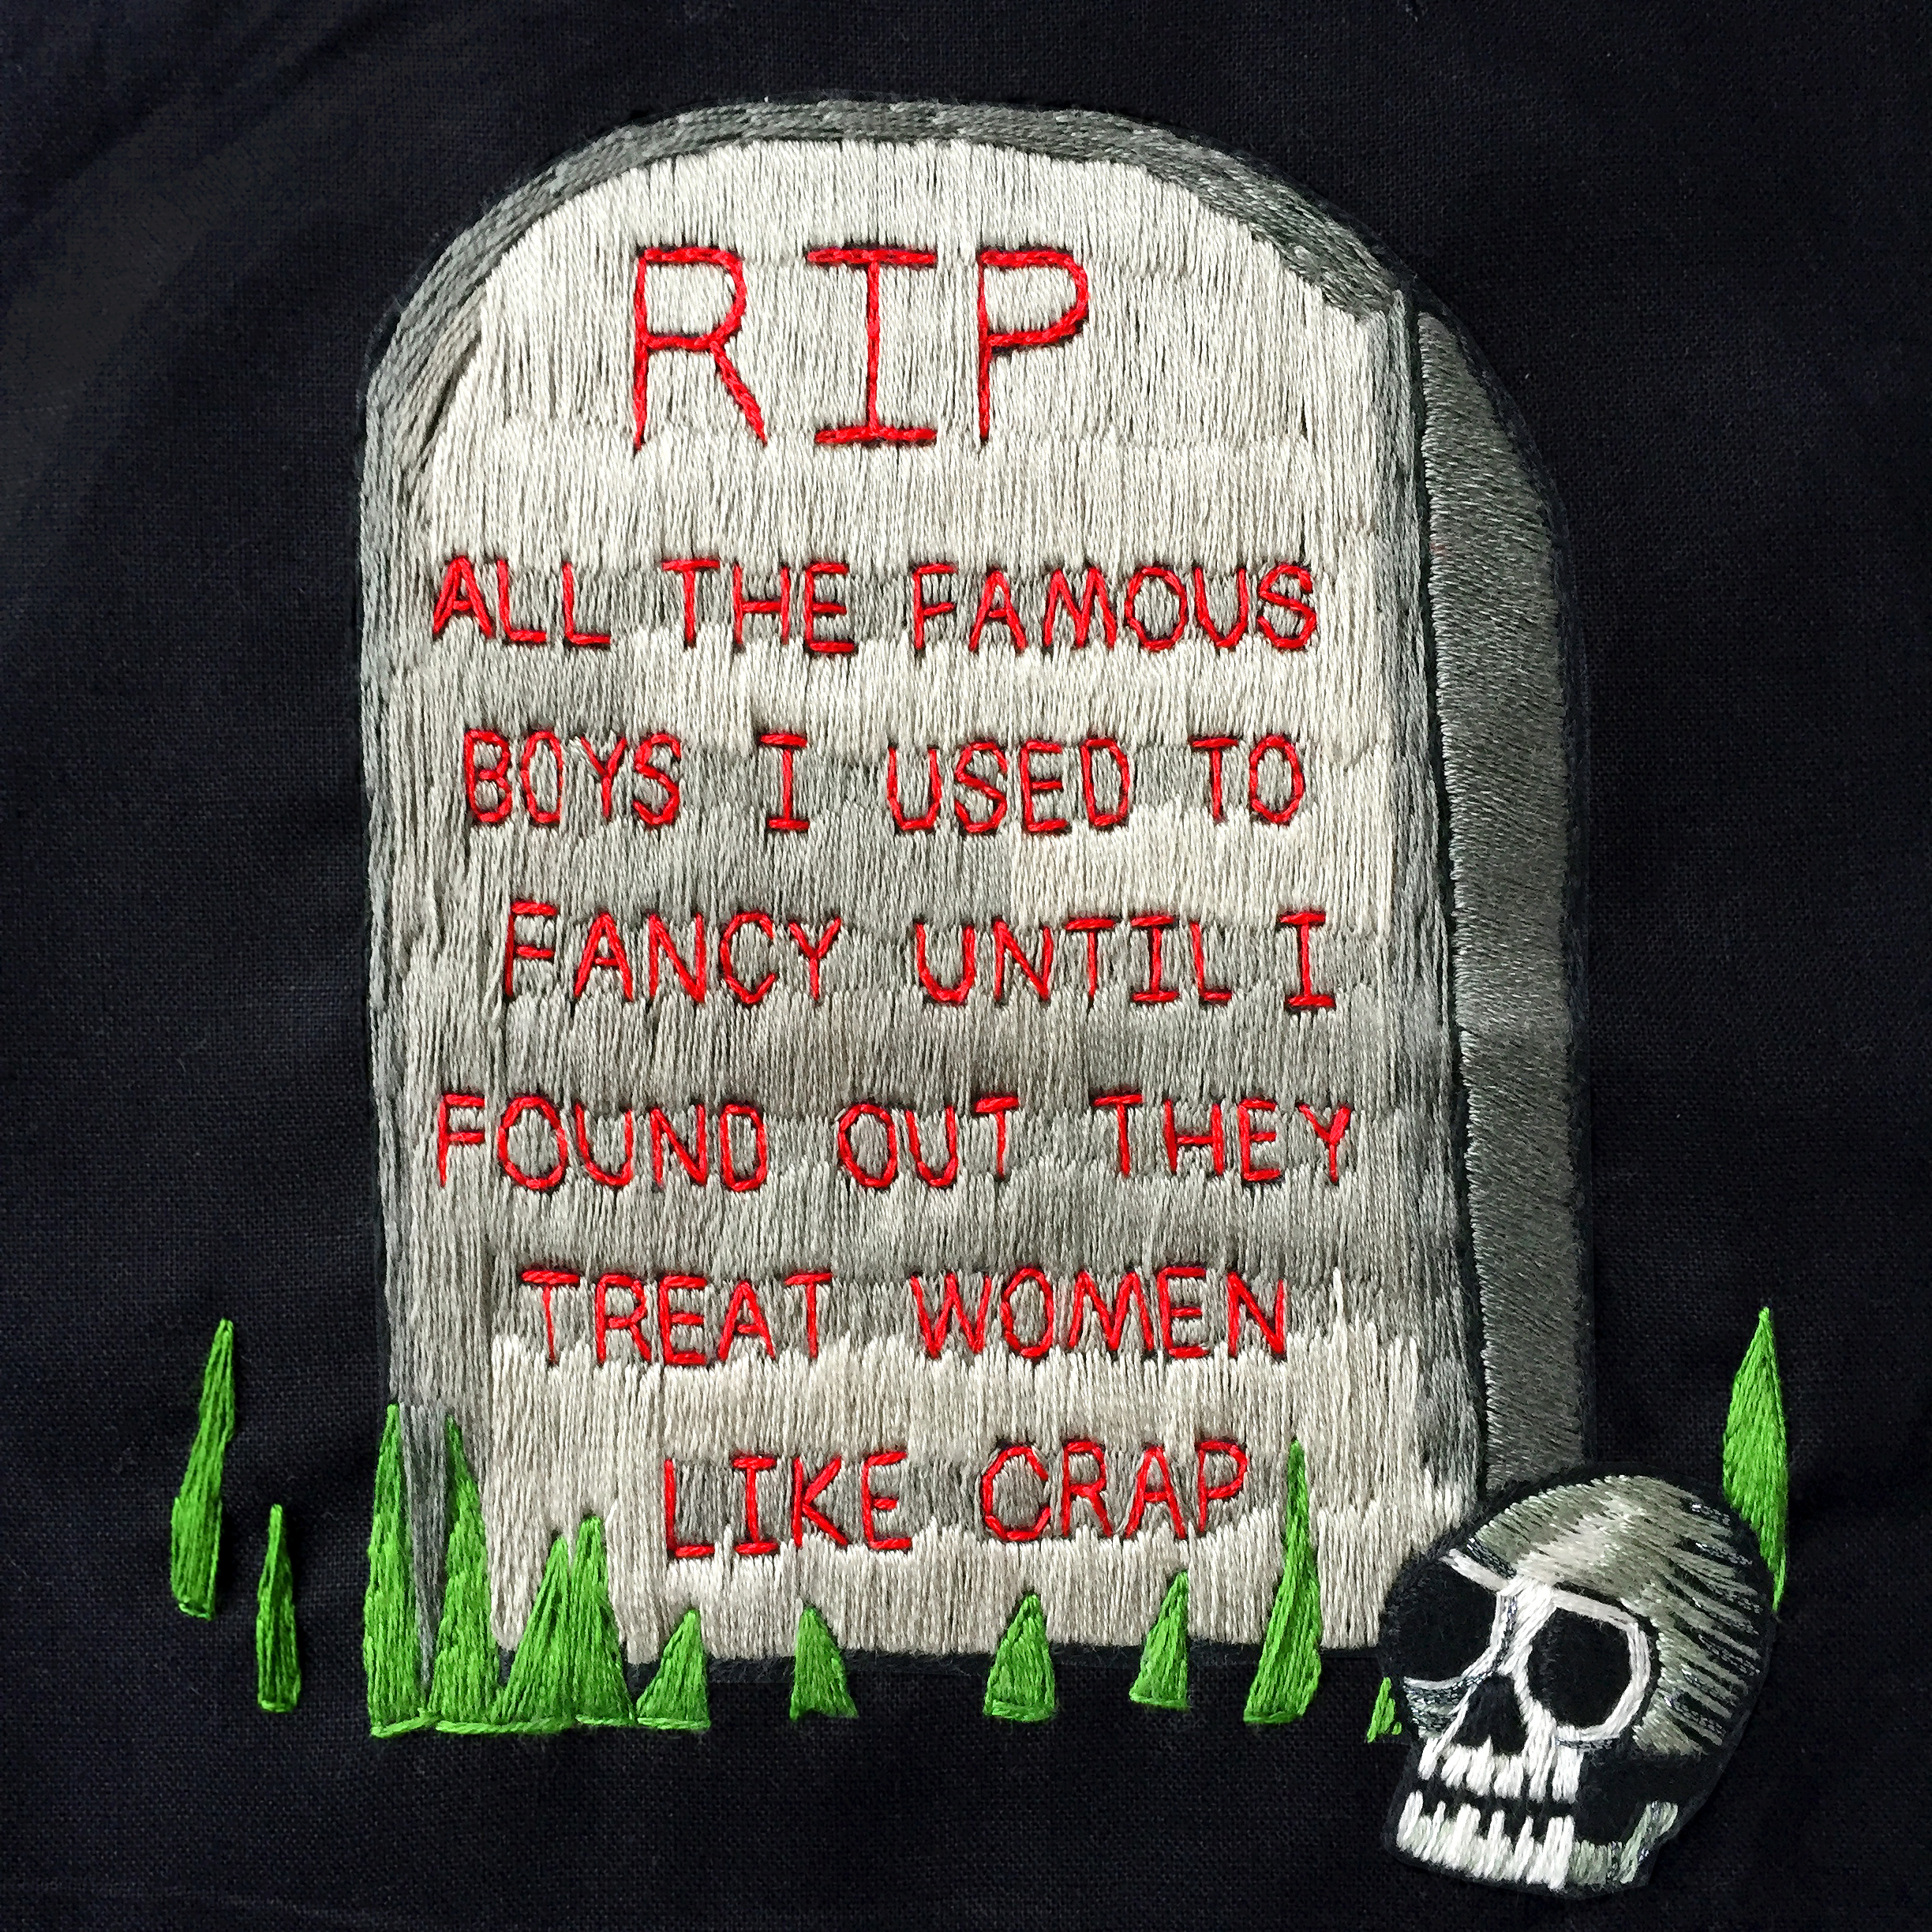 embroidered "RIP ALL THE FAMOUS BOYS I USED TO FANCY UNTIL I FOUND OUT THEY TREAT WOMEN LIKE CRAP" grave, 2017, Sophie King